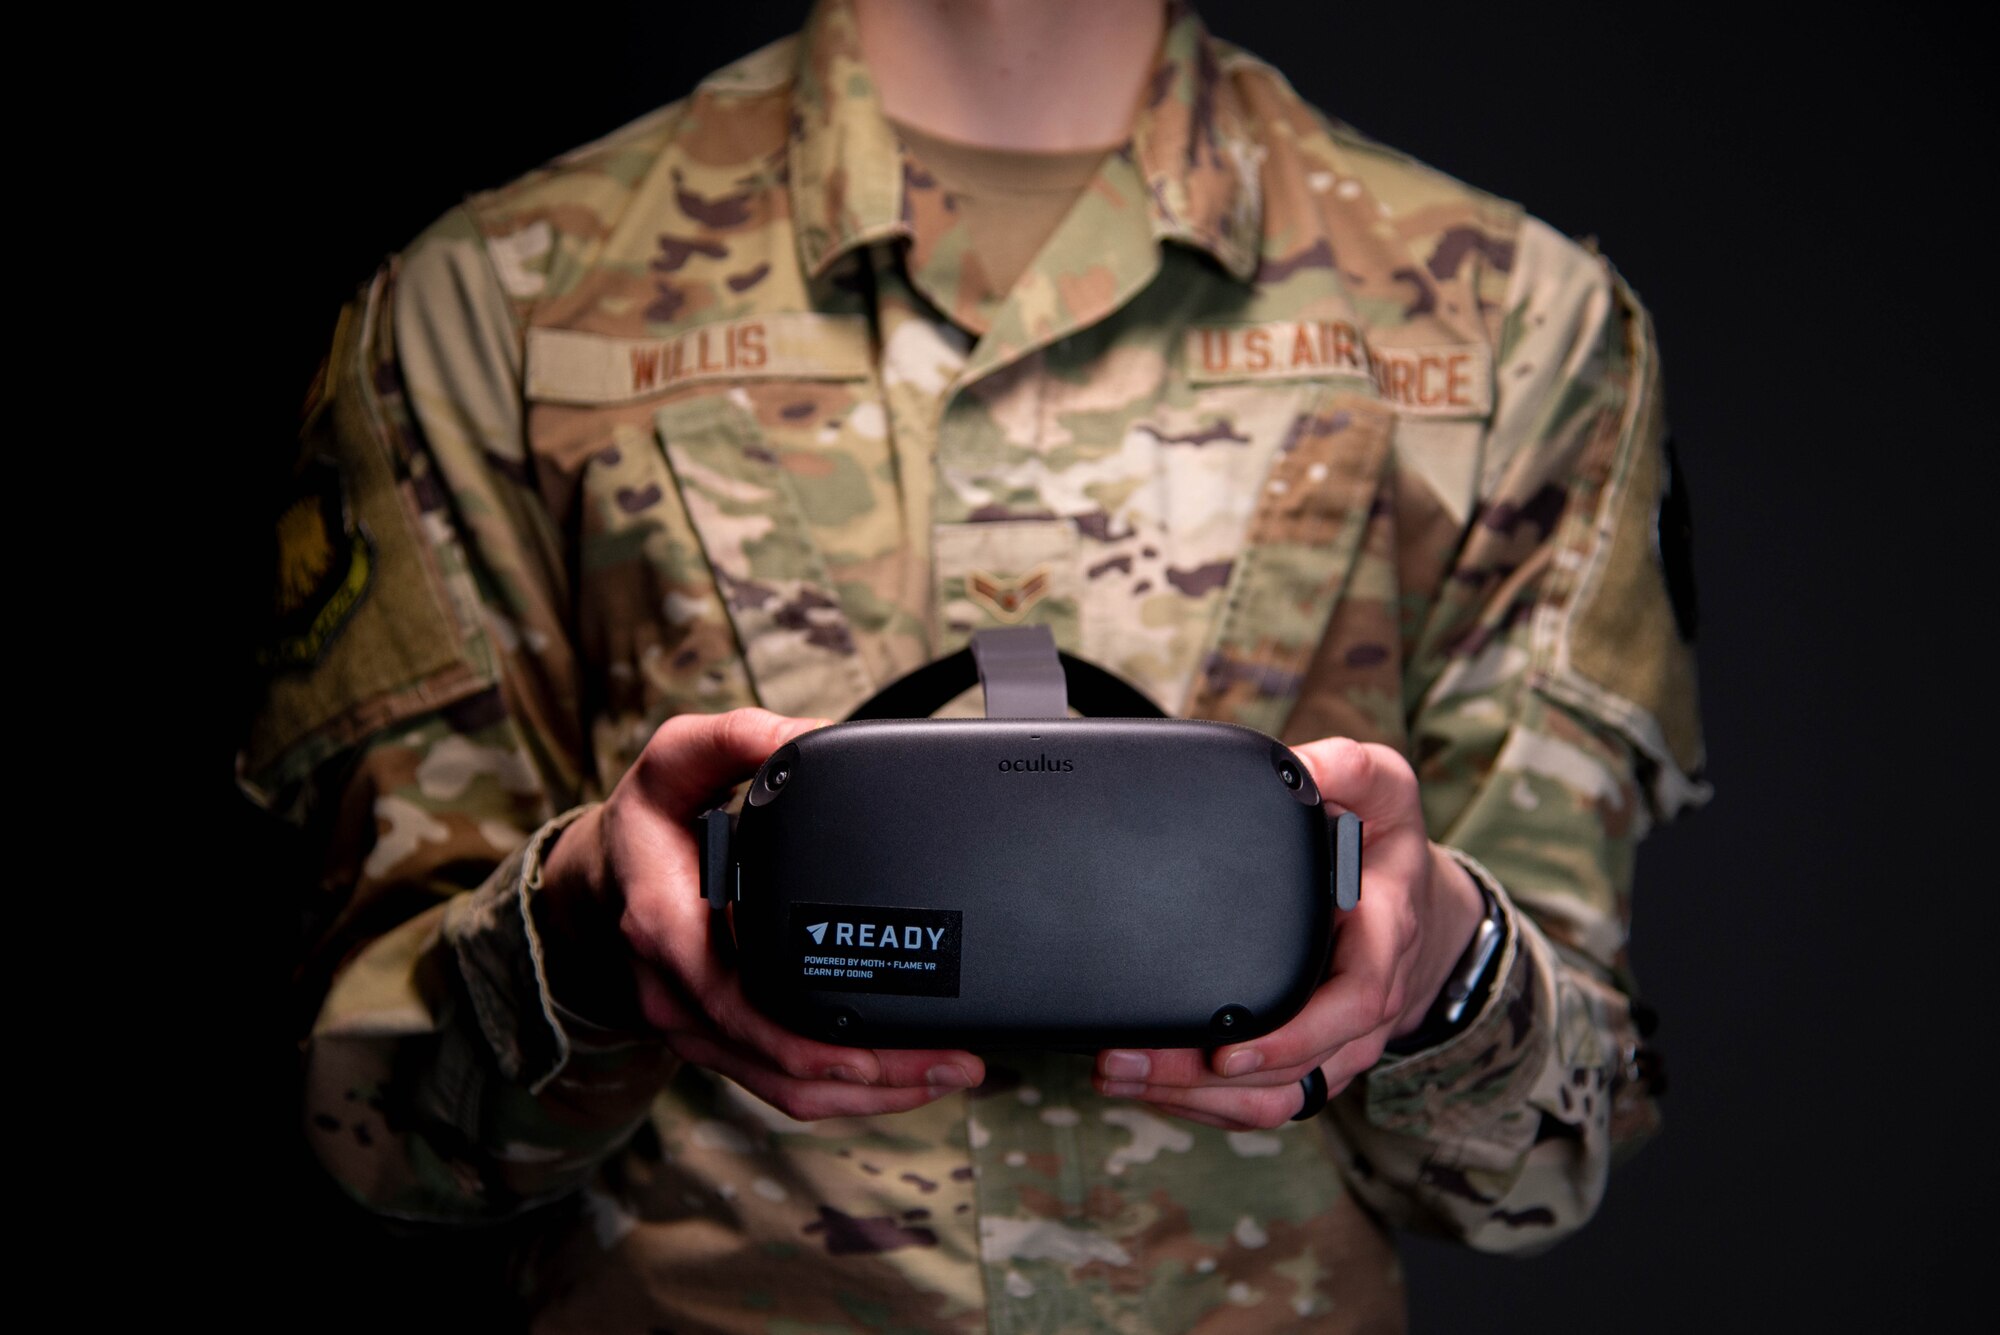 Airman 1st Class Zachary Willis, 22nd Wing Staff Agencies public affairs, holds the headset utilized for virtual reality suicide prevention training April 15, 2021, at McConnell Air Force Base, Kansas. The 30-minute training provides a fully immersive experience that involves Airmen wearing a headset and entering into a virtual training scenario where they interact with an Airman in distress. Currently, the VR training is approved to be one of four options Airmen can choose to fulfill their annual suicide prevention training.  (U.S. Air Force photo by Senior Airman Nilsa Garcia)